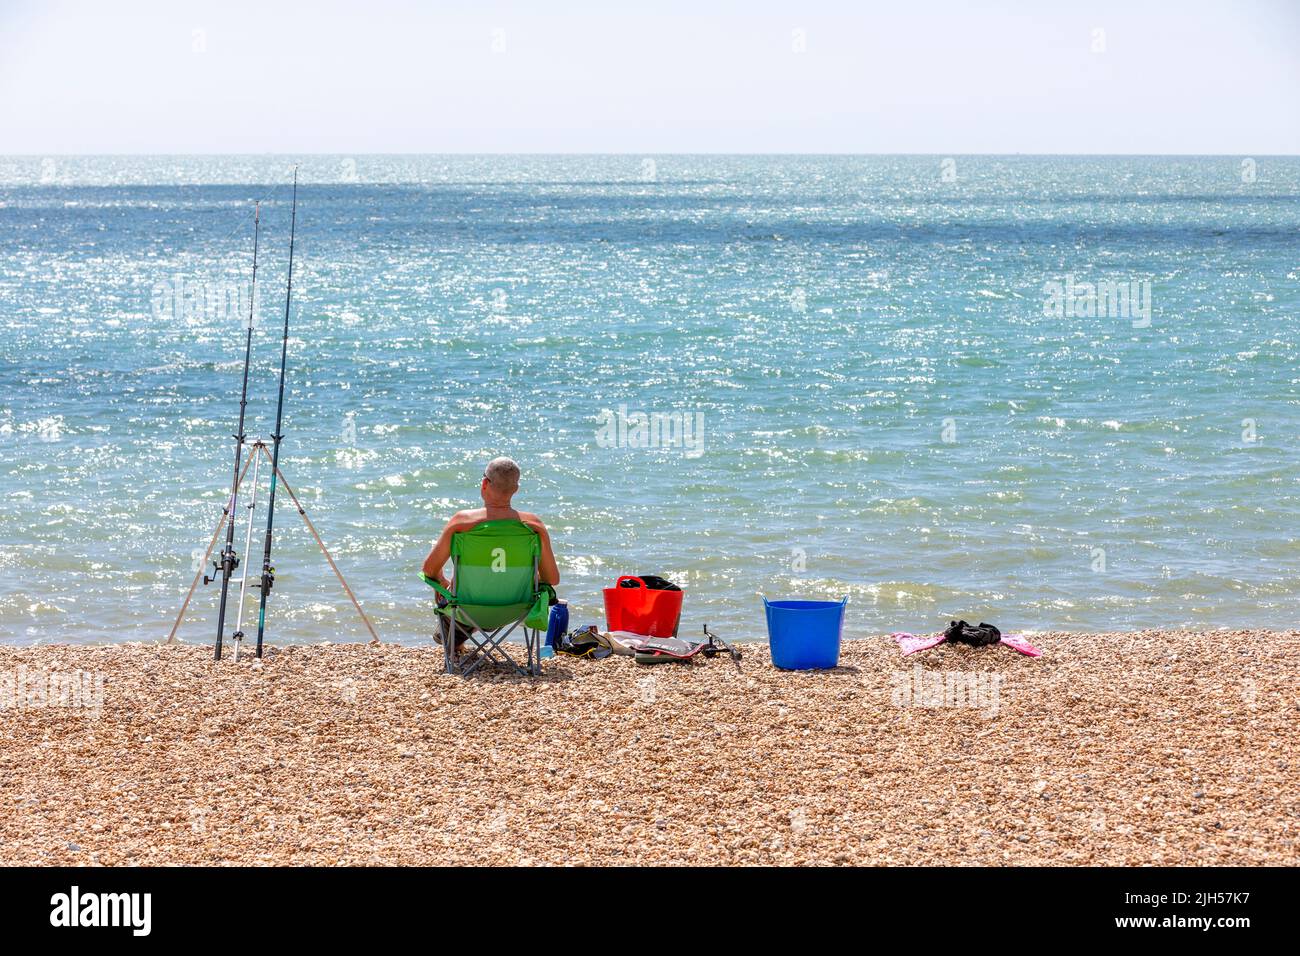 A fisherman sat in a chair on a shingle beach Stock Photo